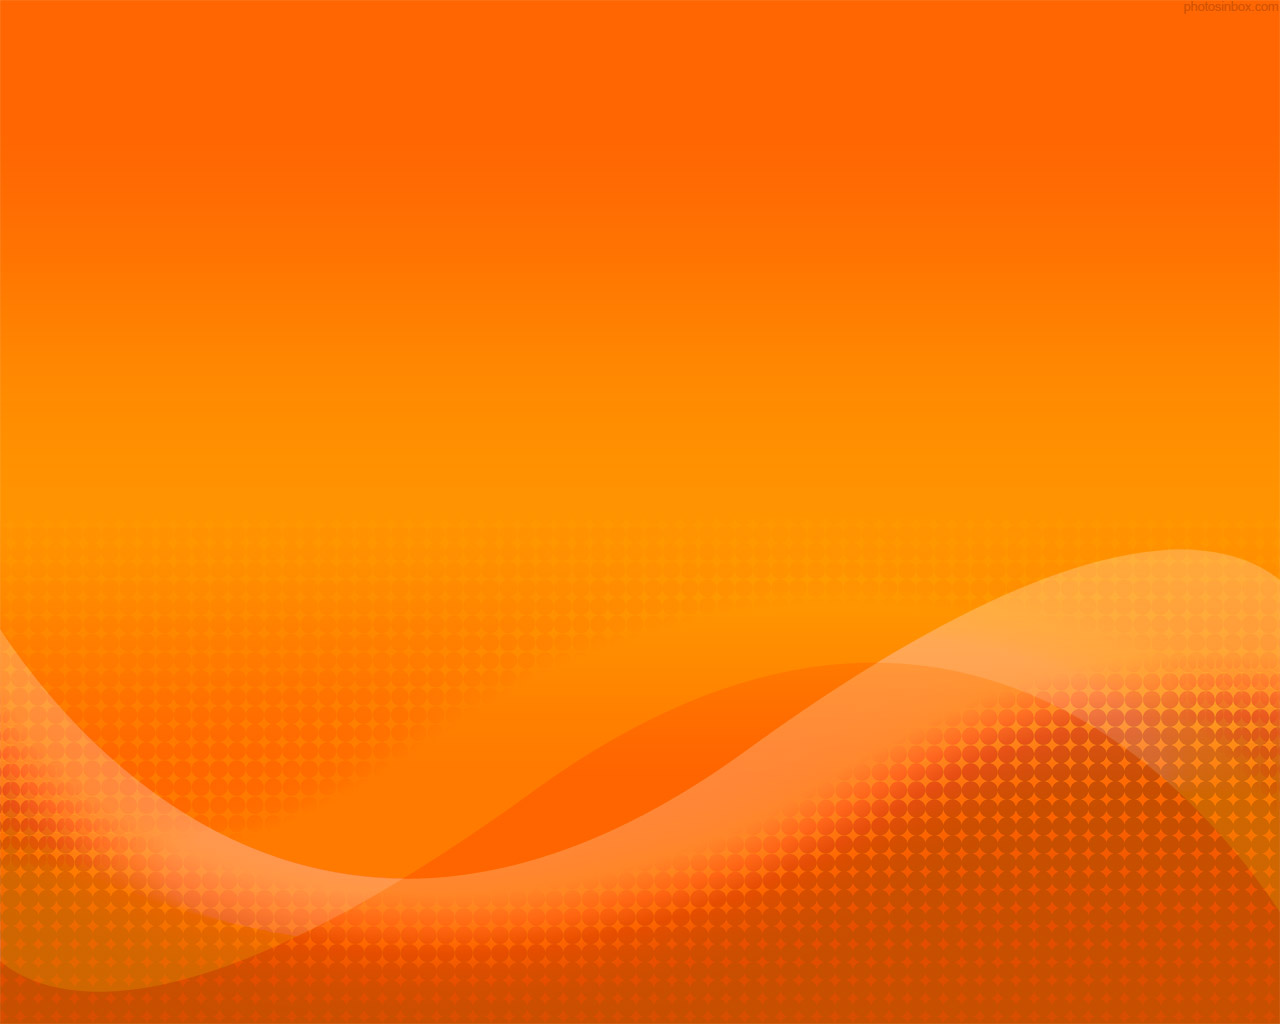 Free Halftone Orange Abstract Backgrounds For PowerPoint